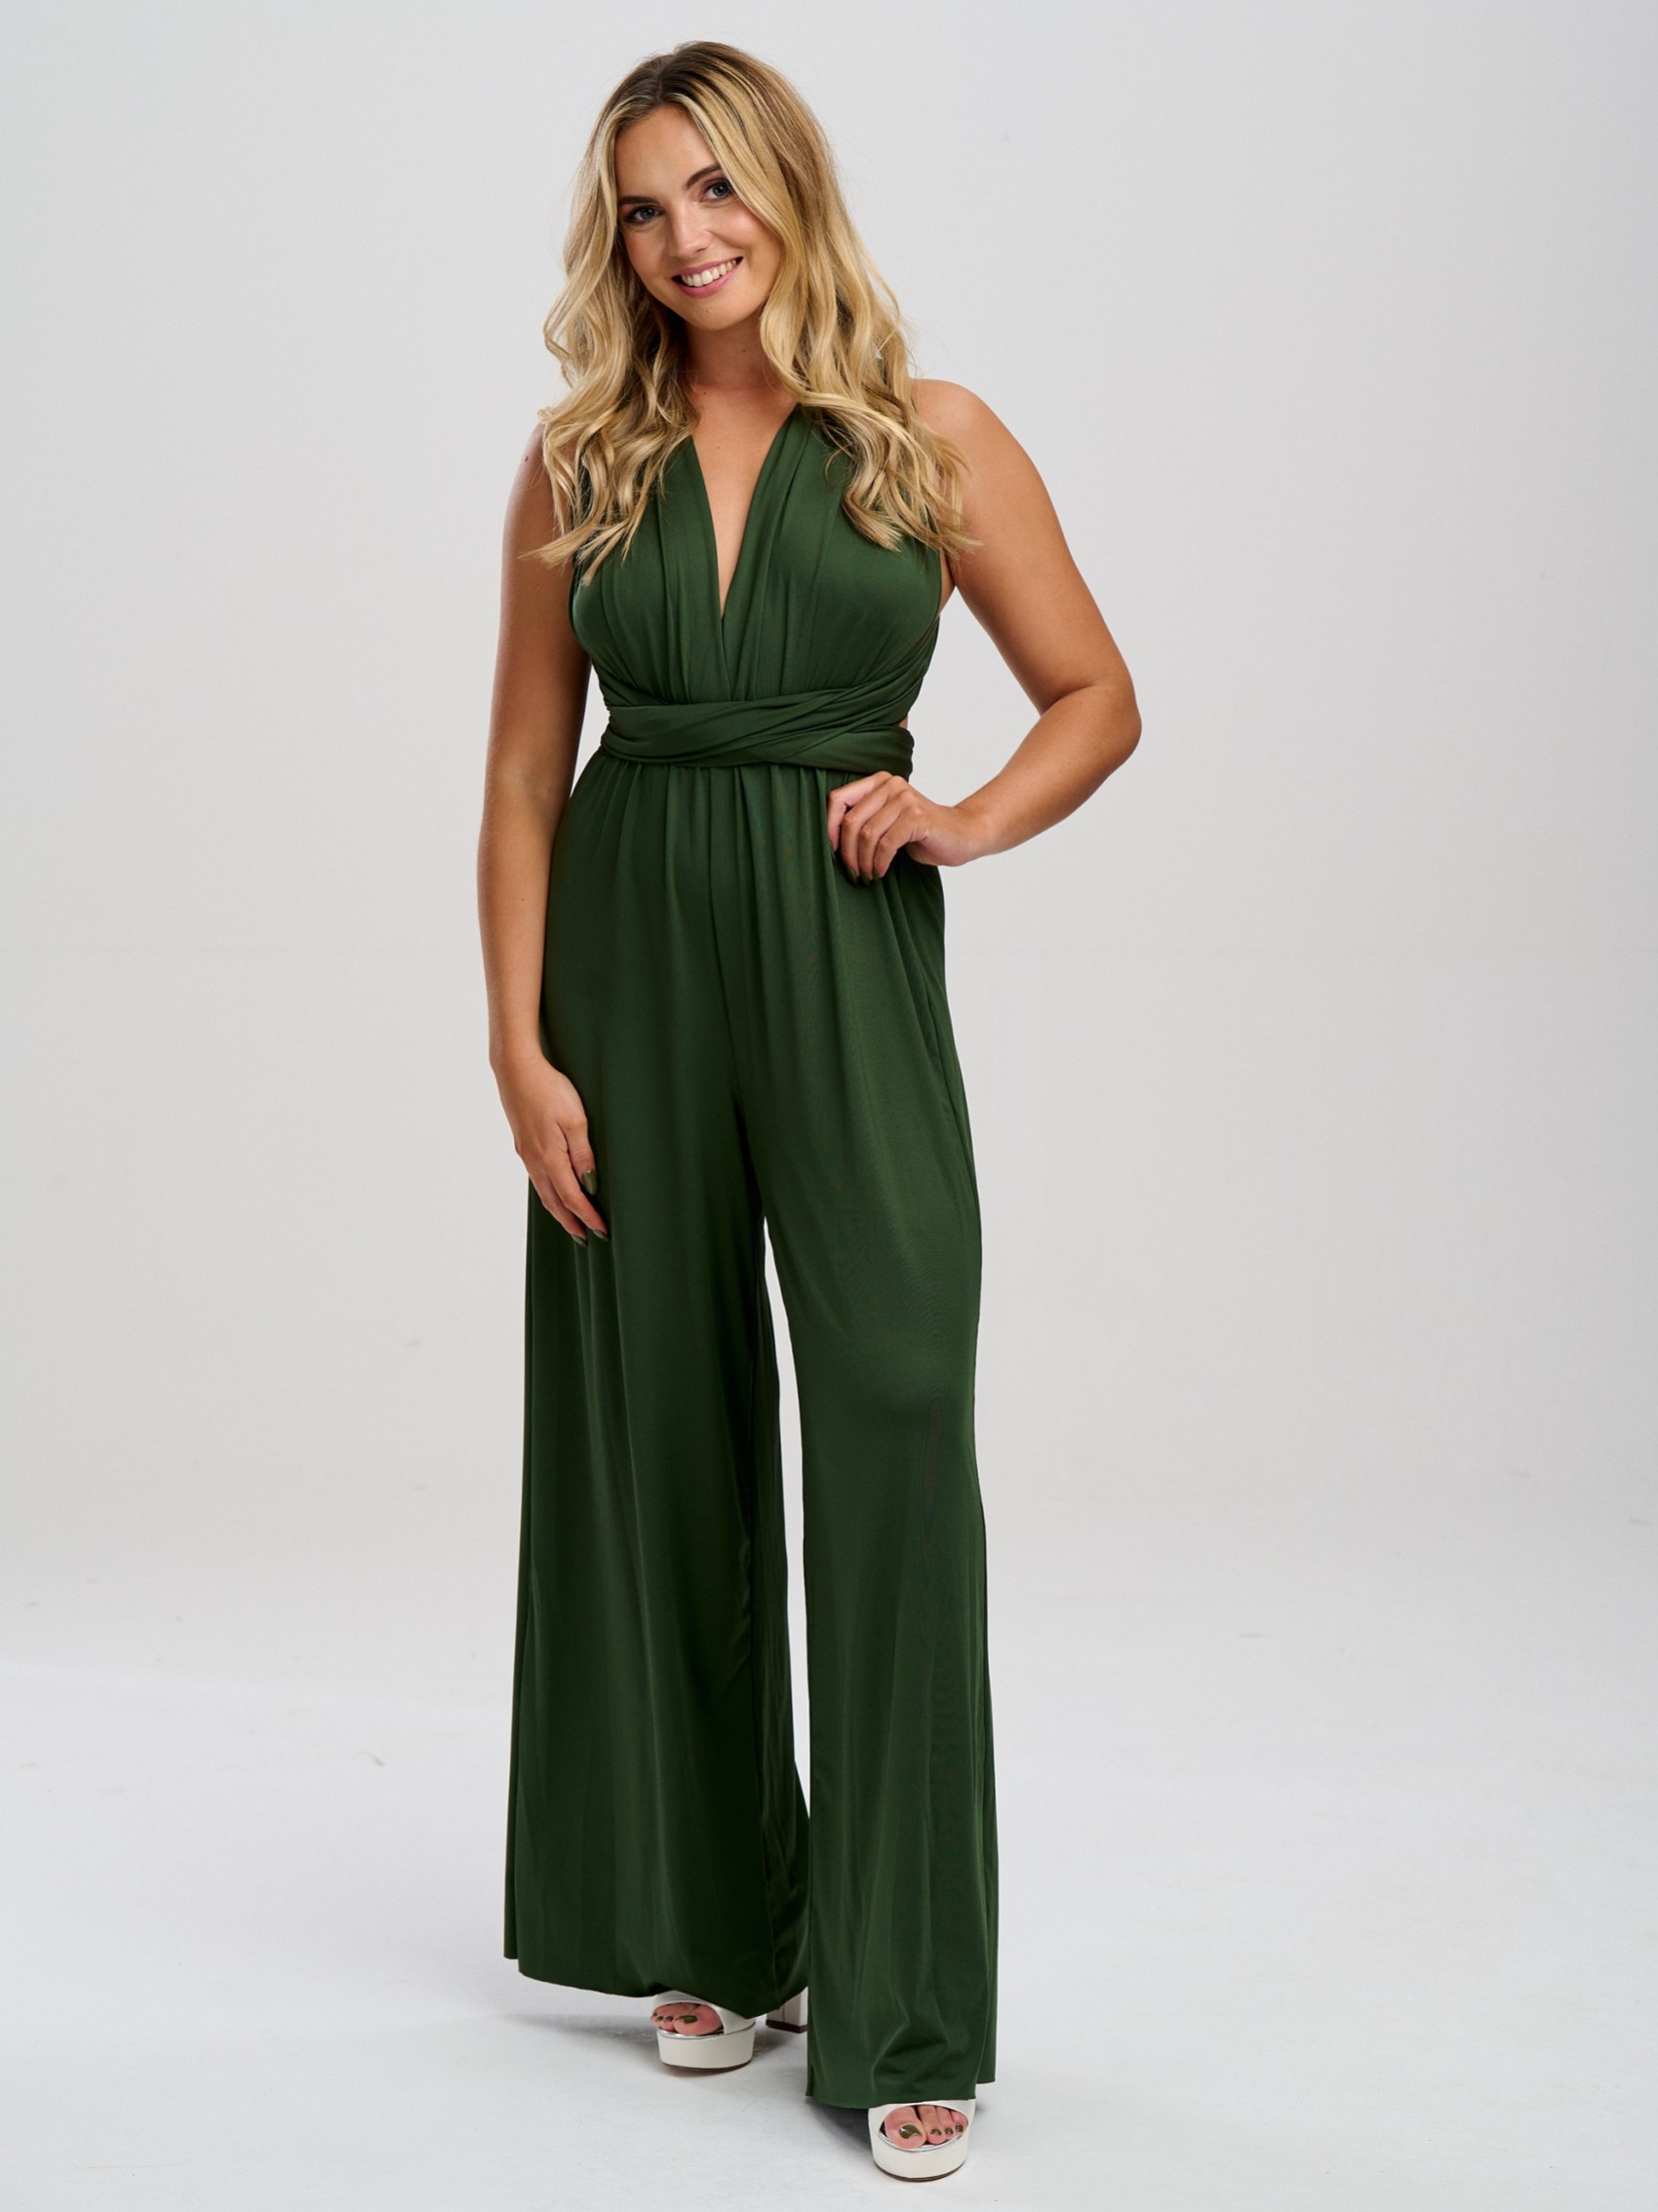 https://images.laceandfavour.com/_cache/_products_main/1700x2268/emily-rose-olive-green-multiway-bridesmaid-jumpsuit-one-size-9670.jpg